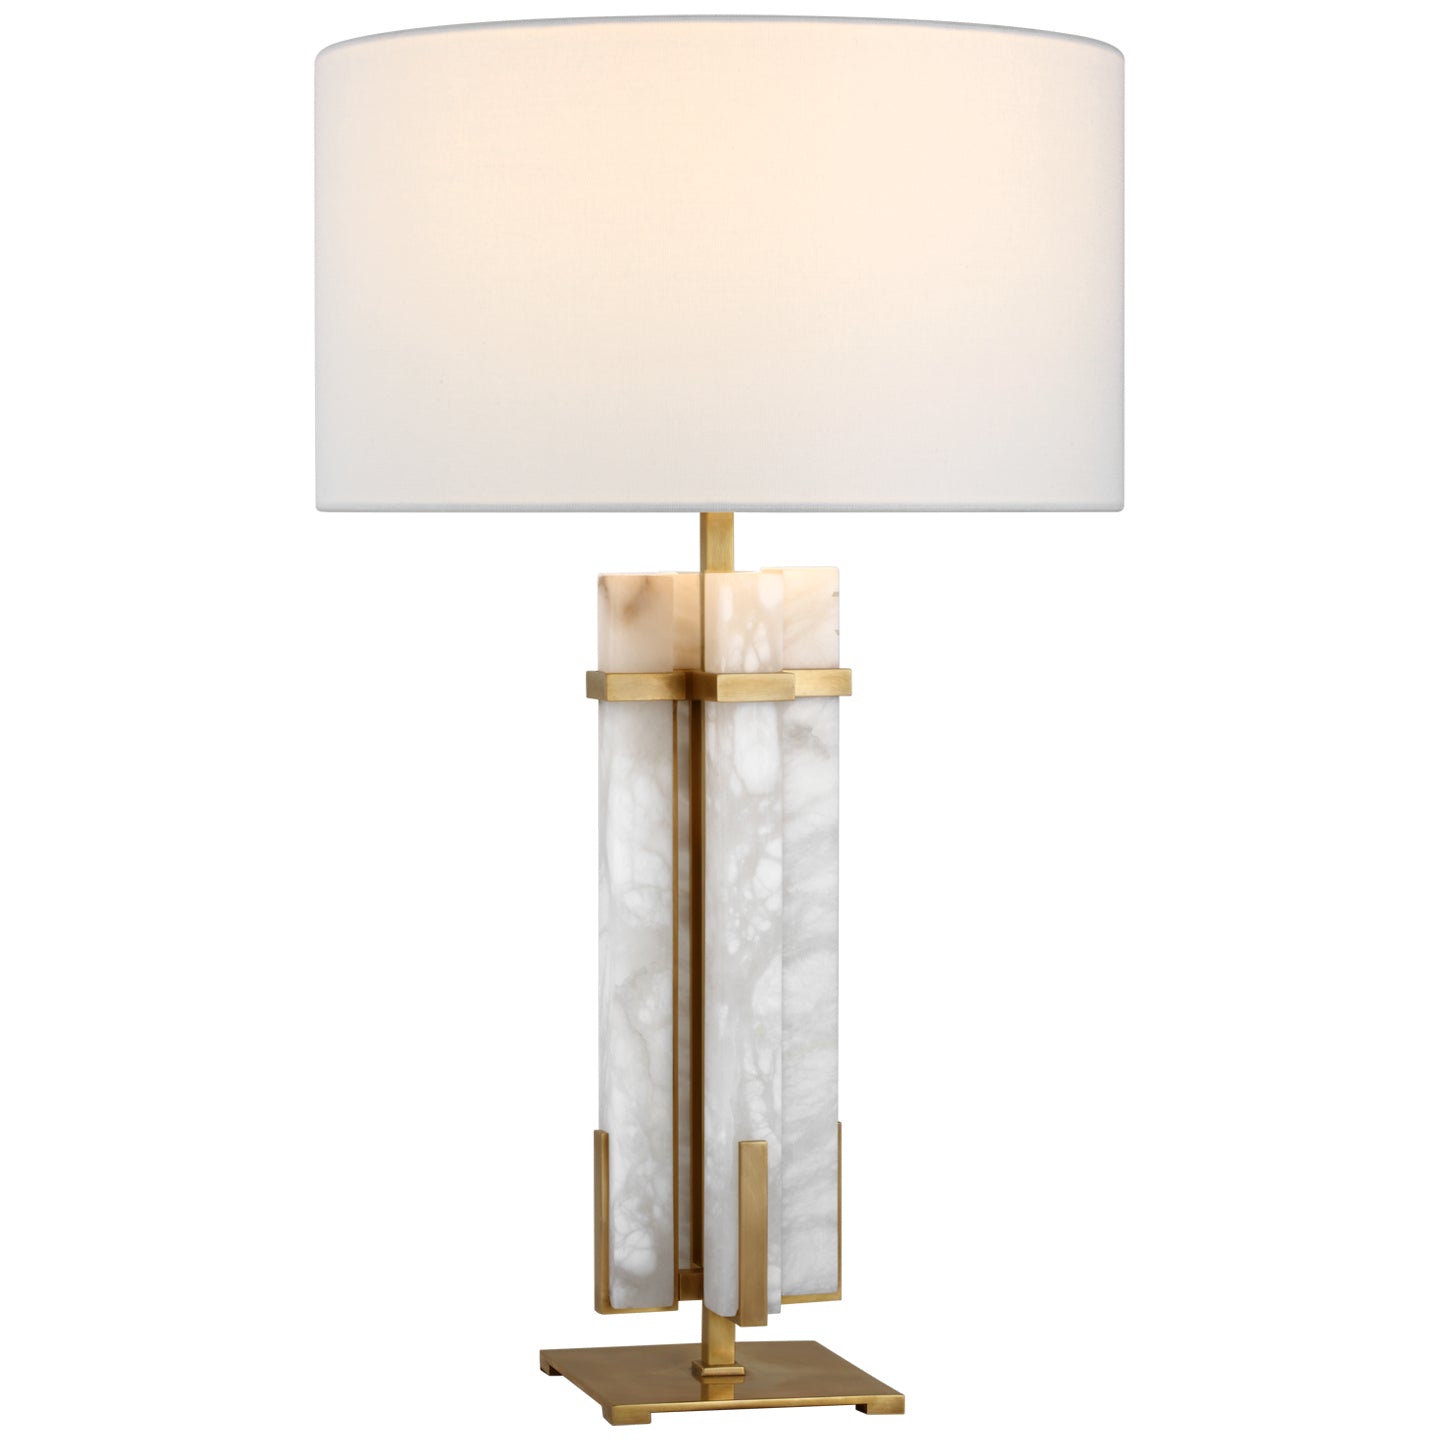 Load image into Gallery viewer, Visual Comfort Signature - S 3910HAB/ALB-L - LED Table Lamp - Malik - Hand-Rubbed Antique Brass and Alabaster
